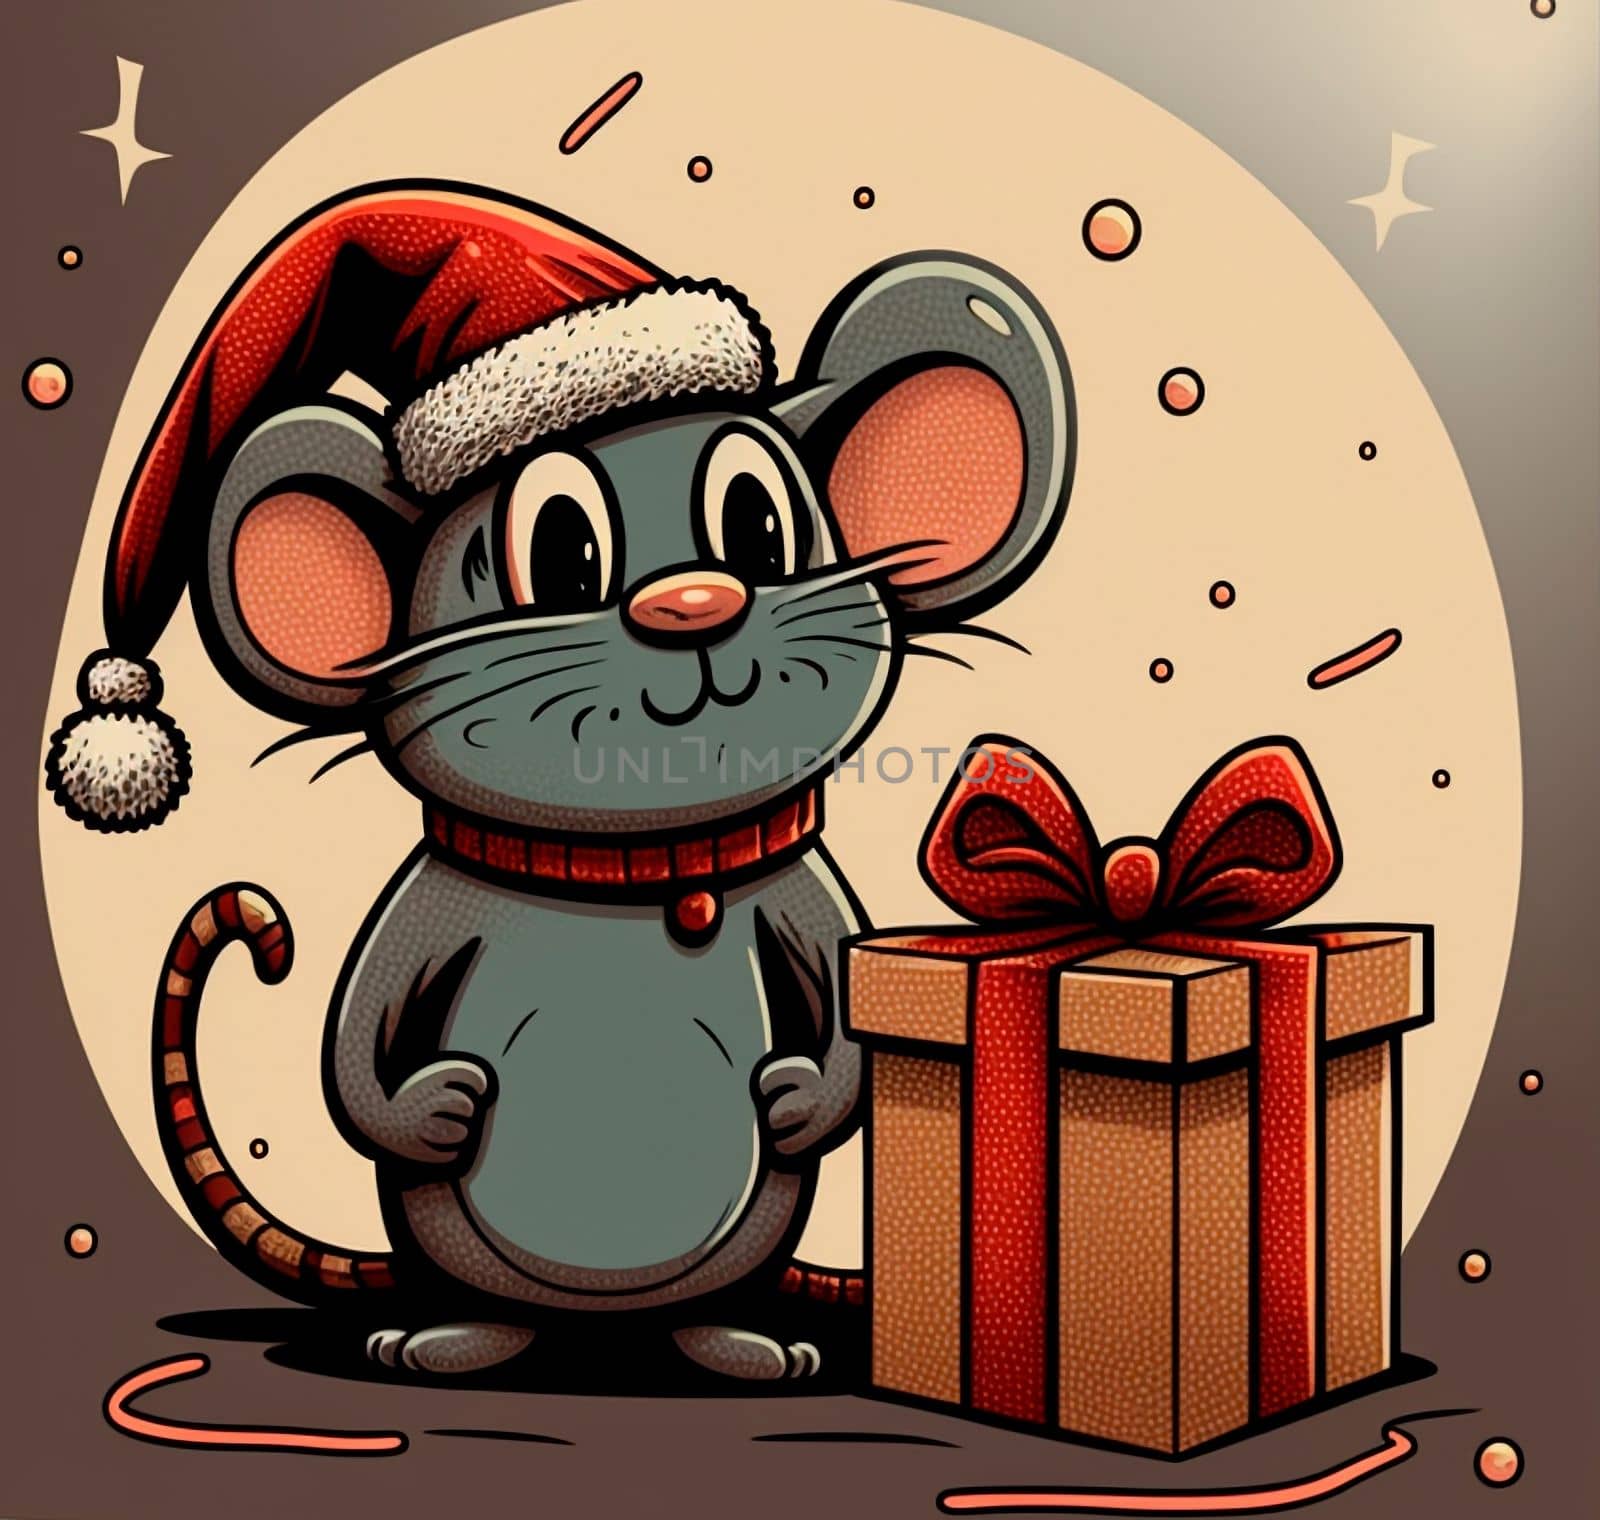 Illustration of a mouse that received its Christmas gift. High quality illustration